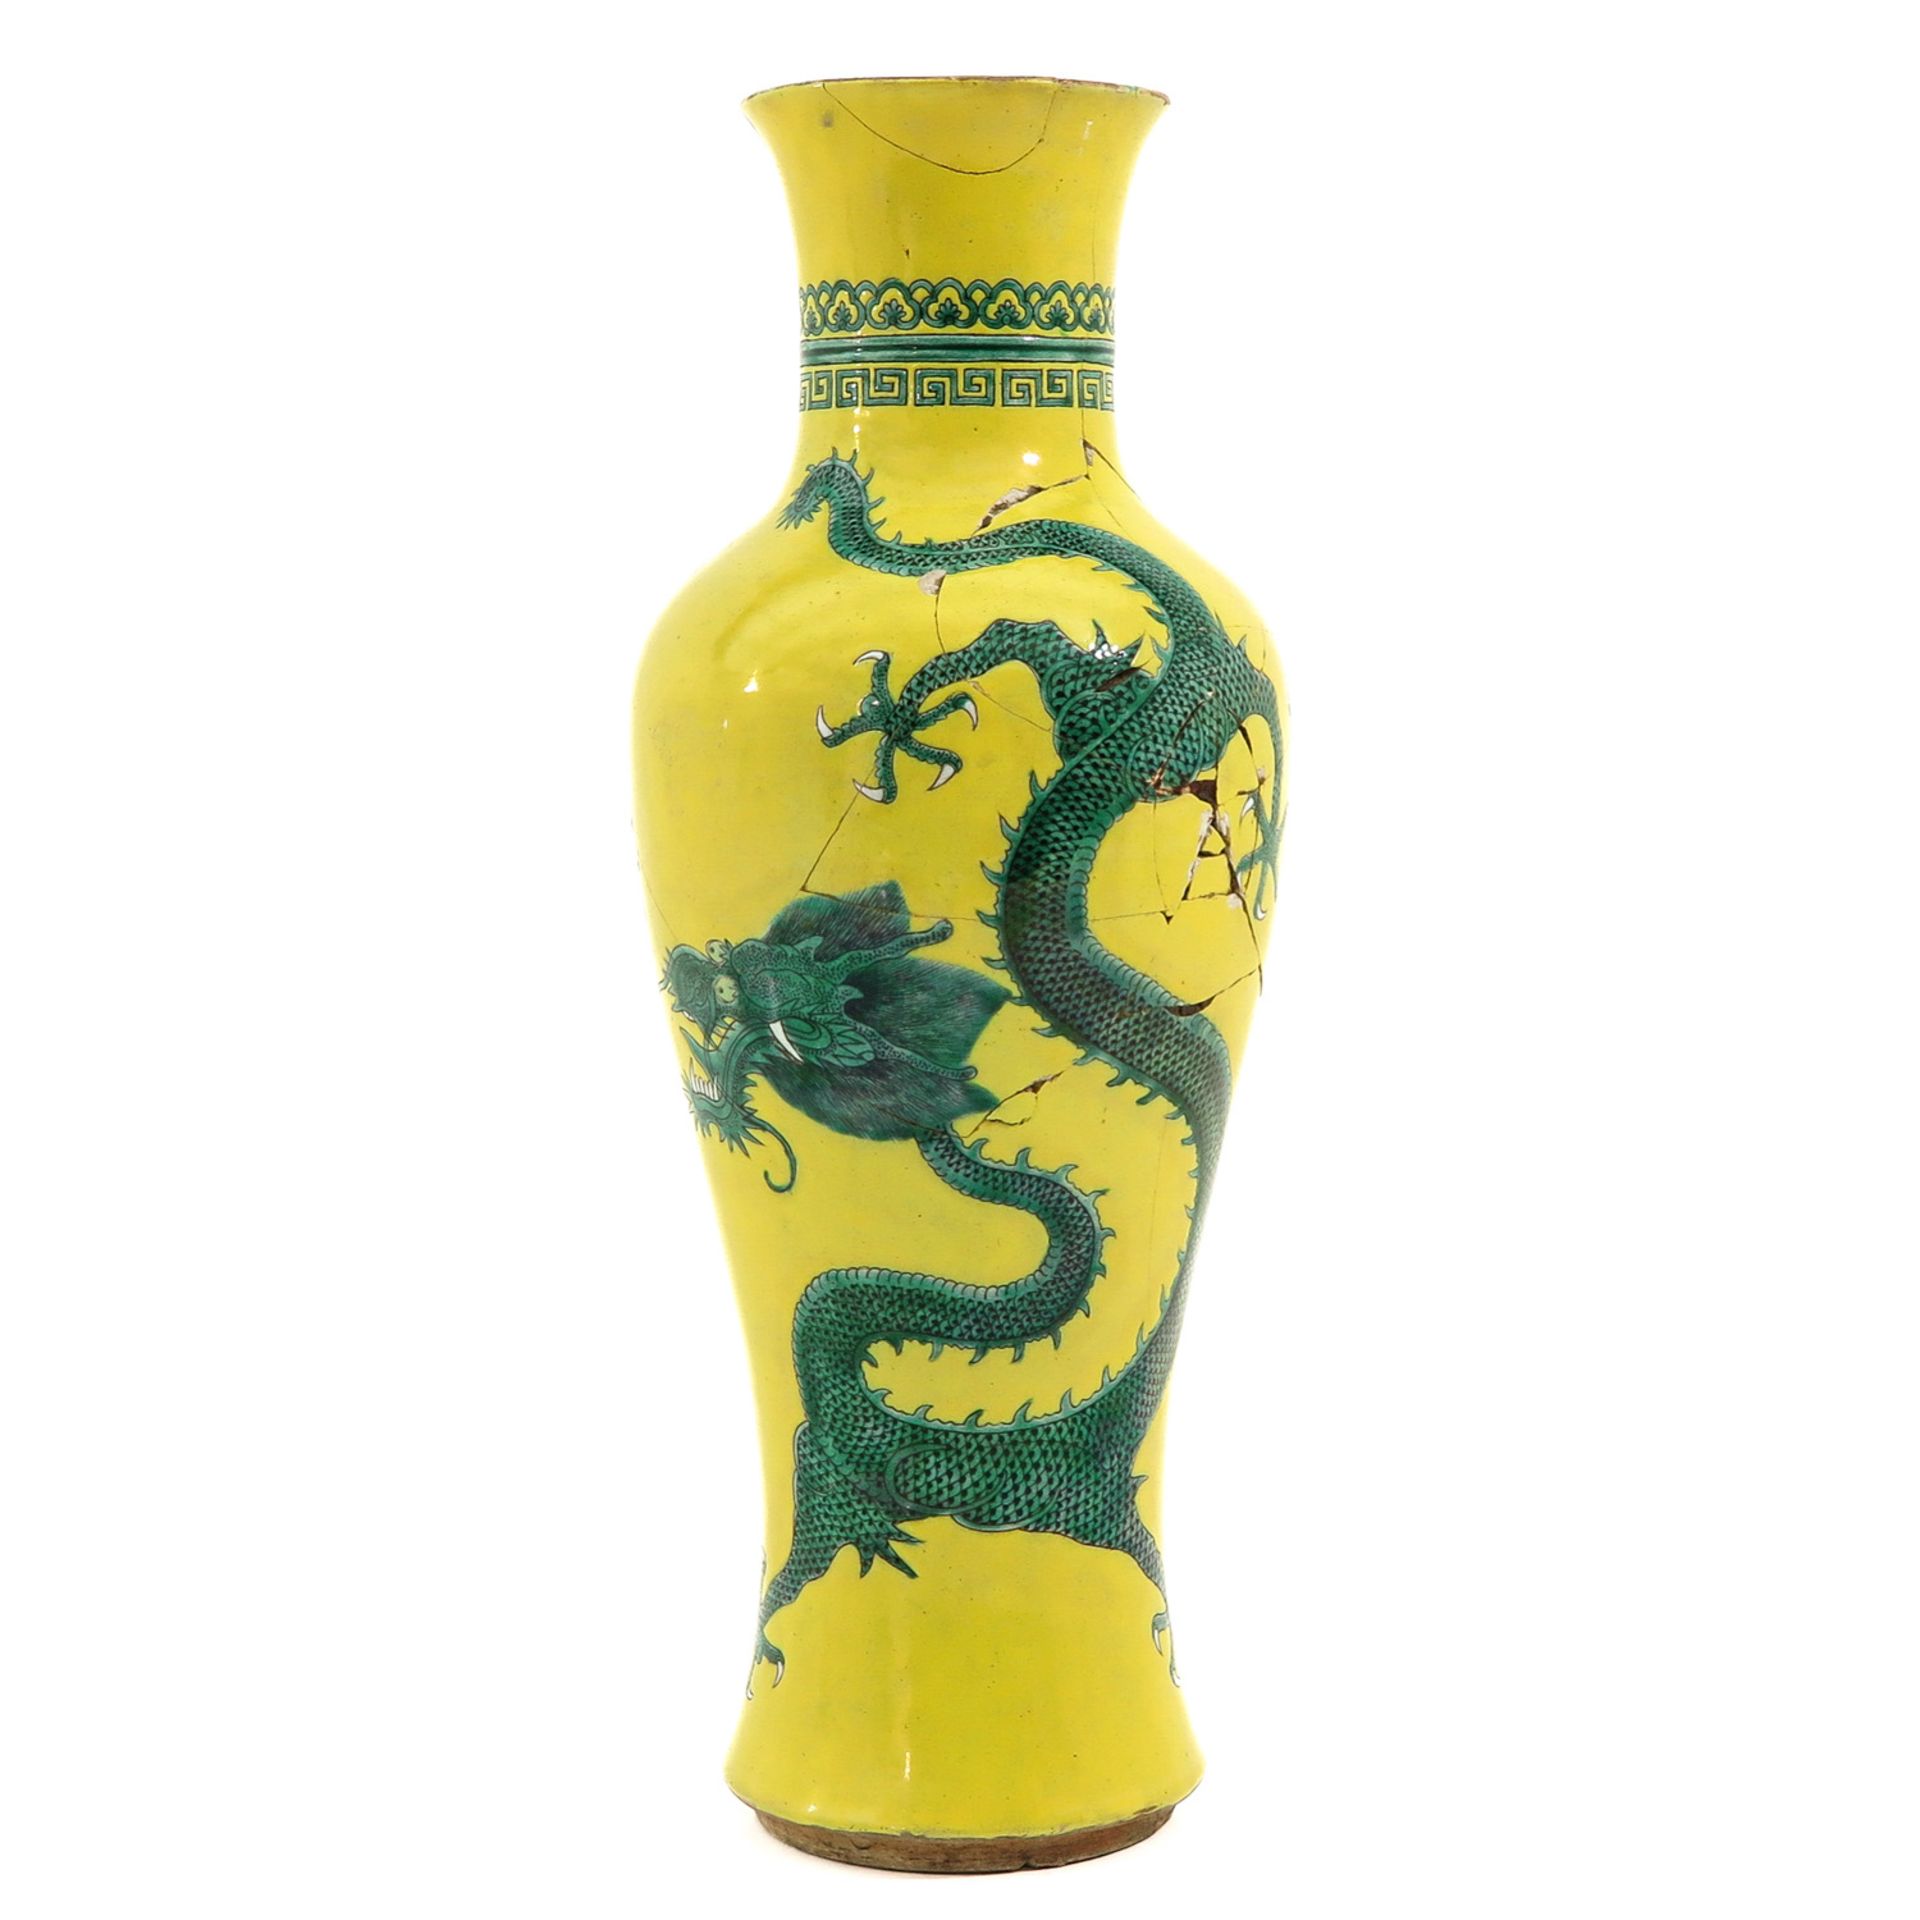 A Yellow and Green Dragon Vase - Image 4 of 10